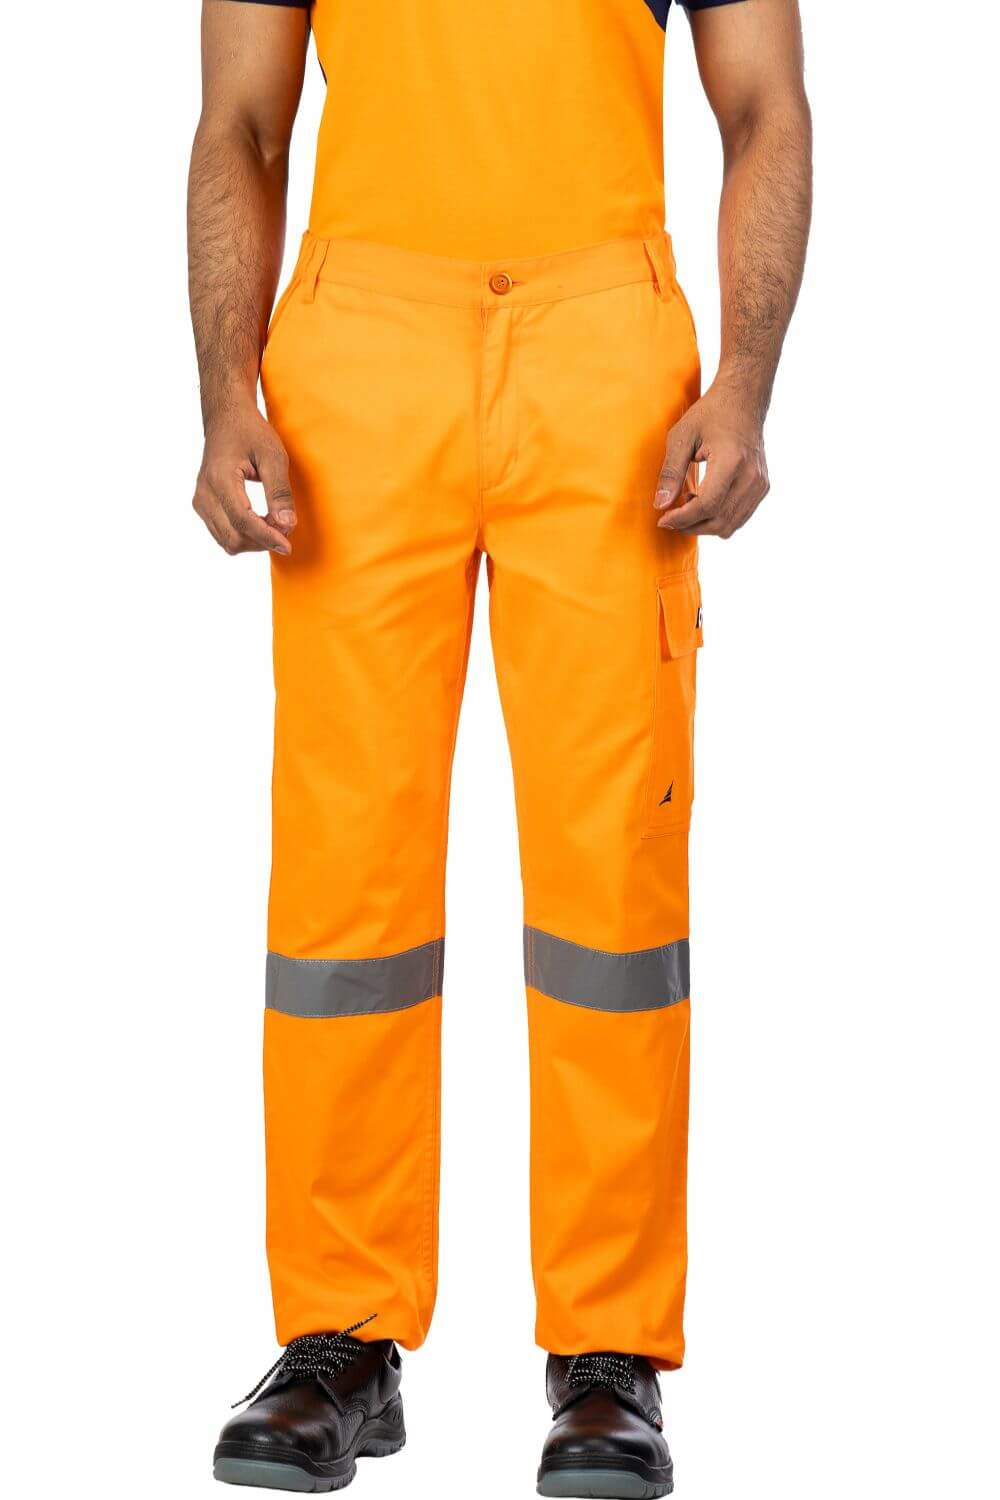 AS/NZS 4602.1:2011 standards light-weight protective Orange trouser